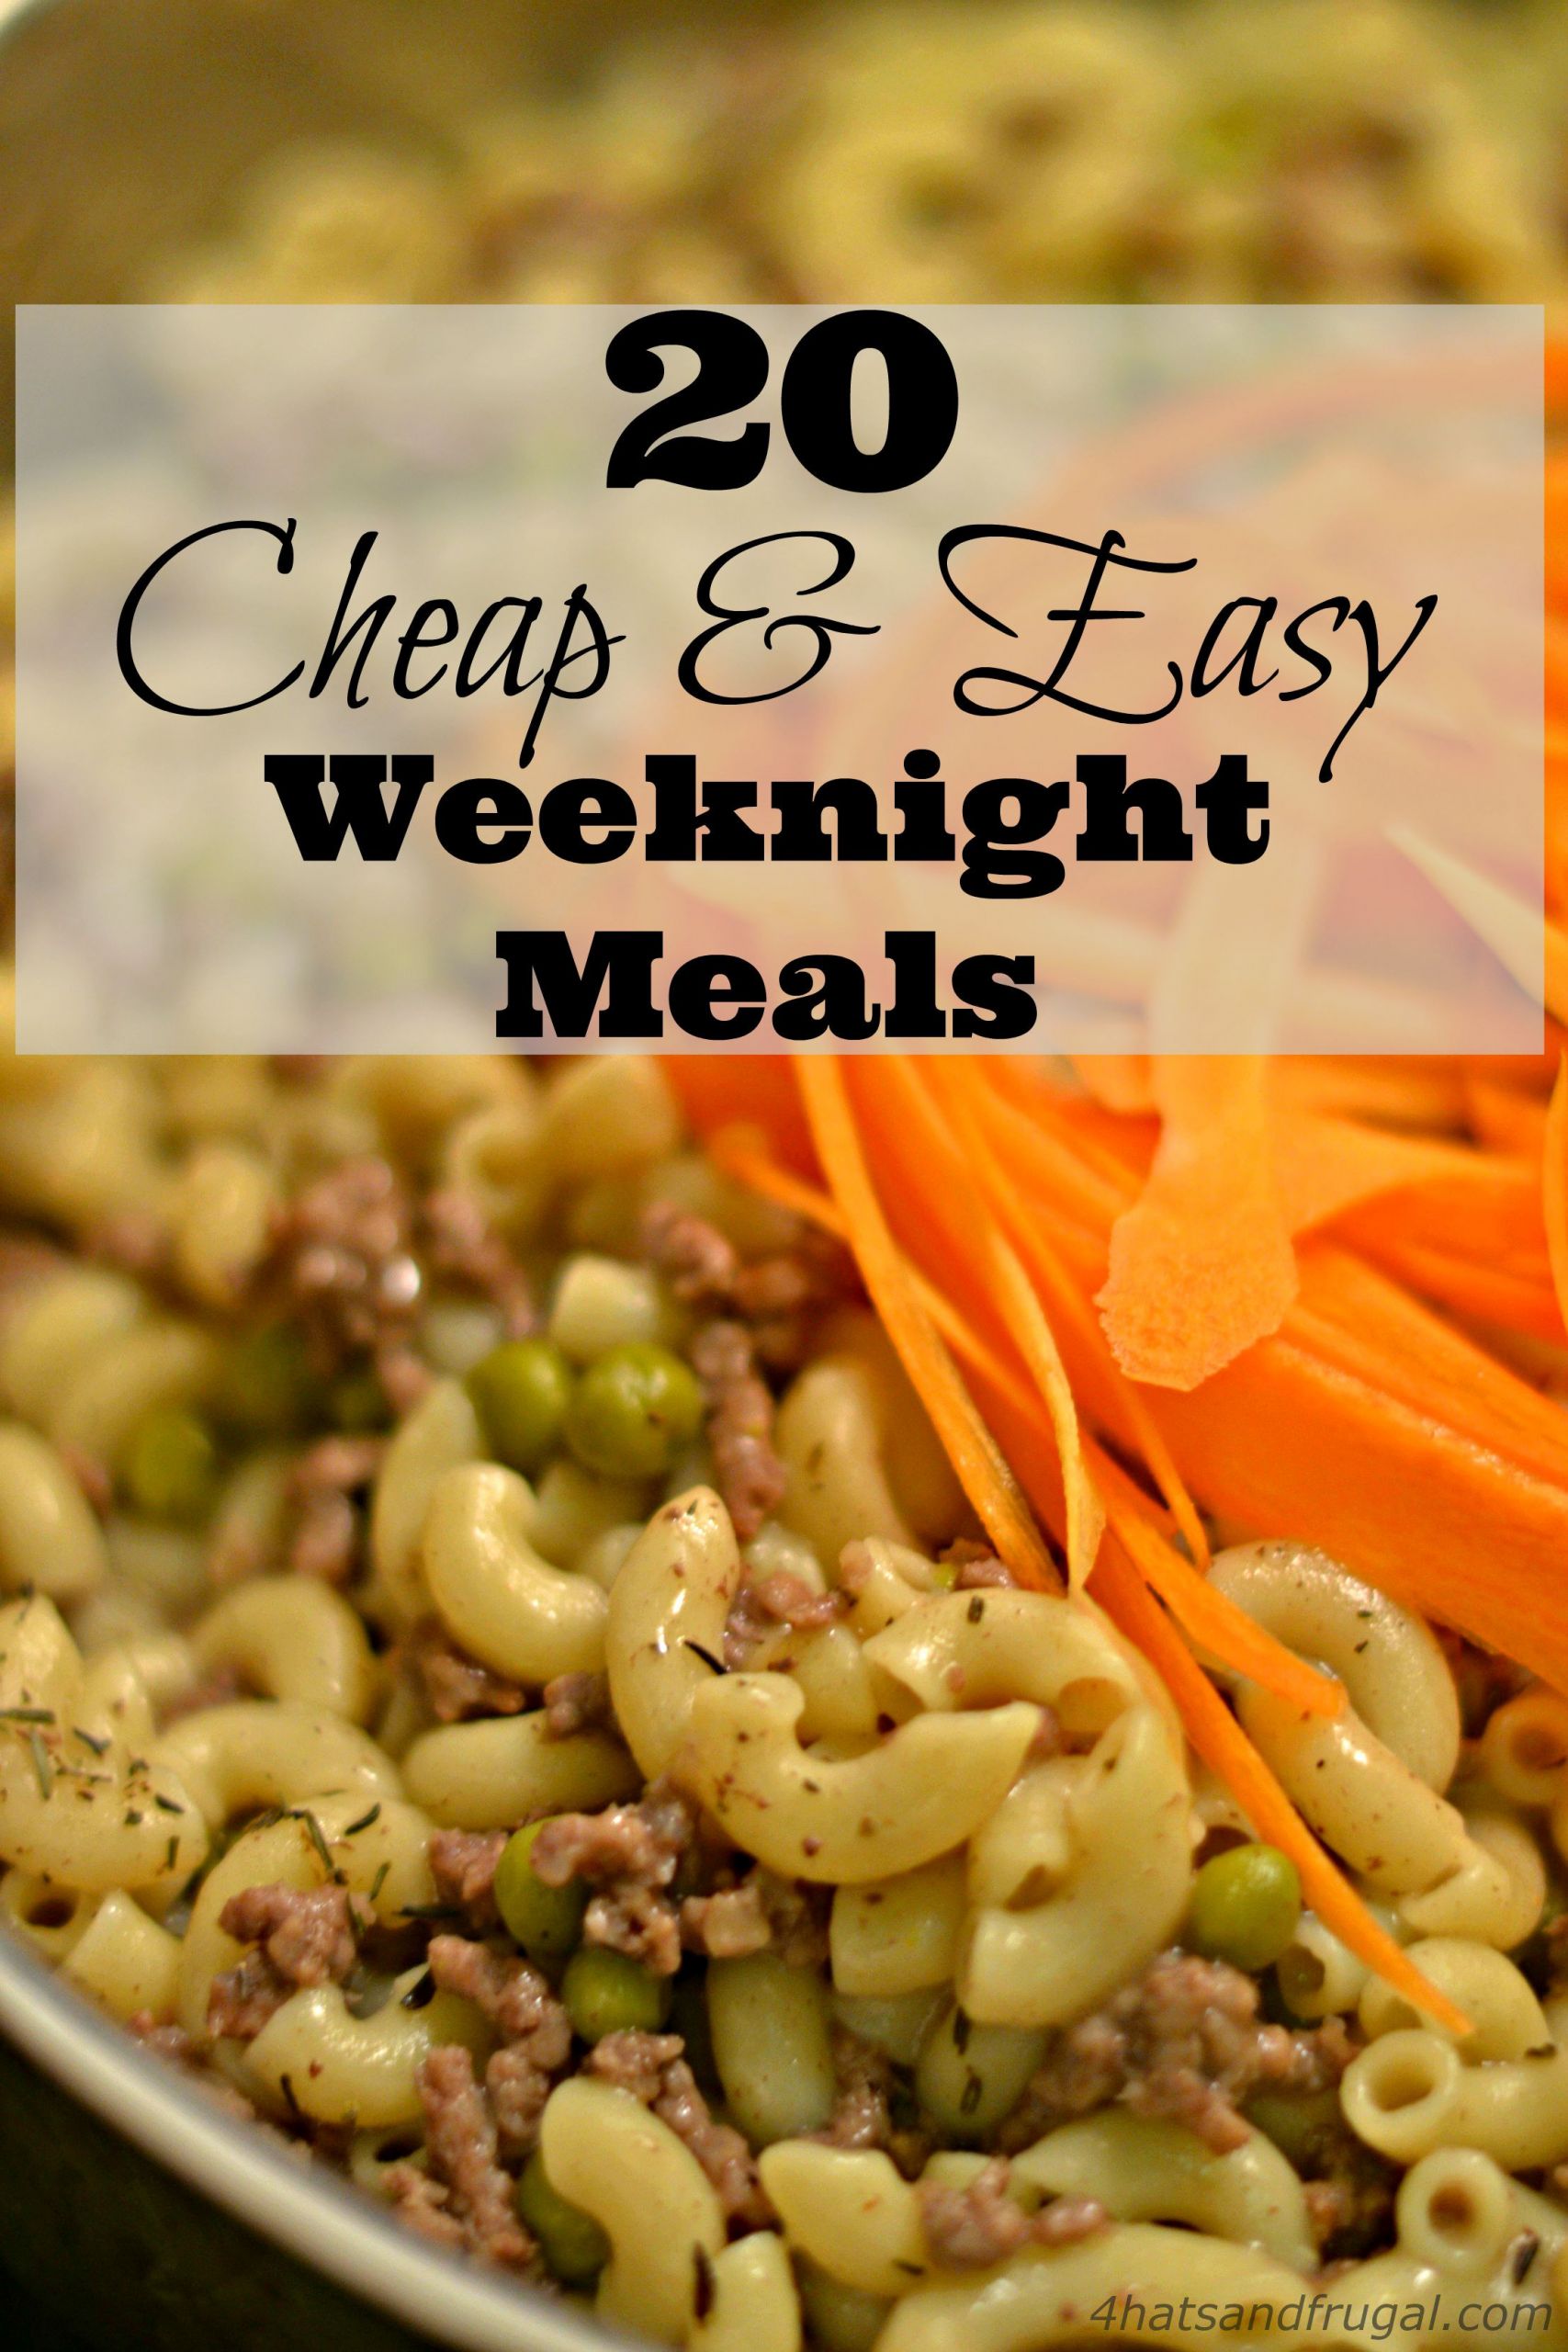 Cheap Quick Dinners
 20 Cheap & Easy Weeknight Meals 4 Hats and Frugal